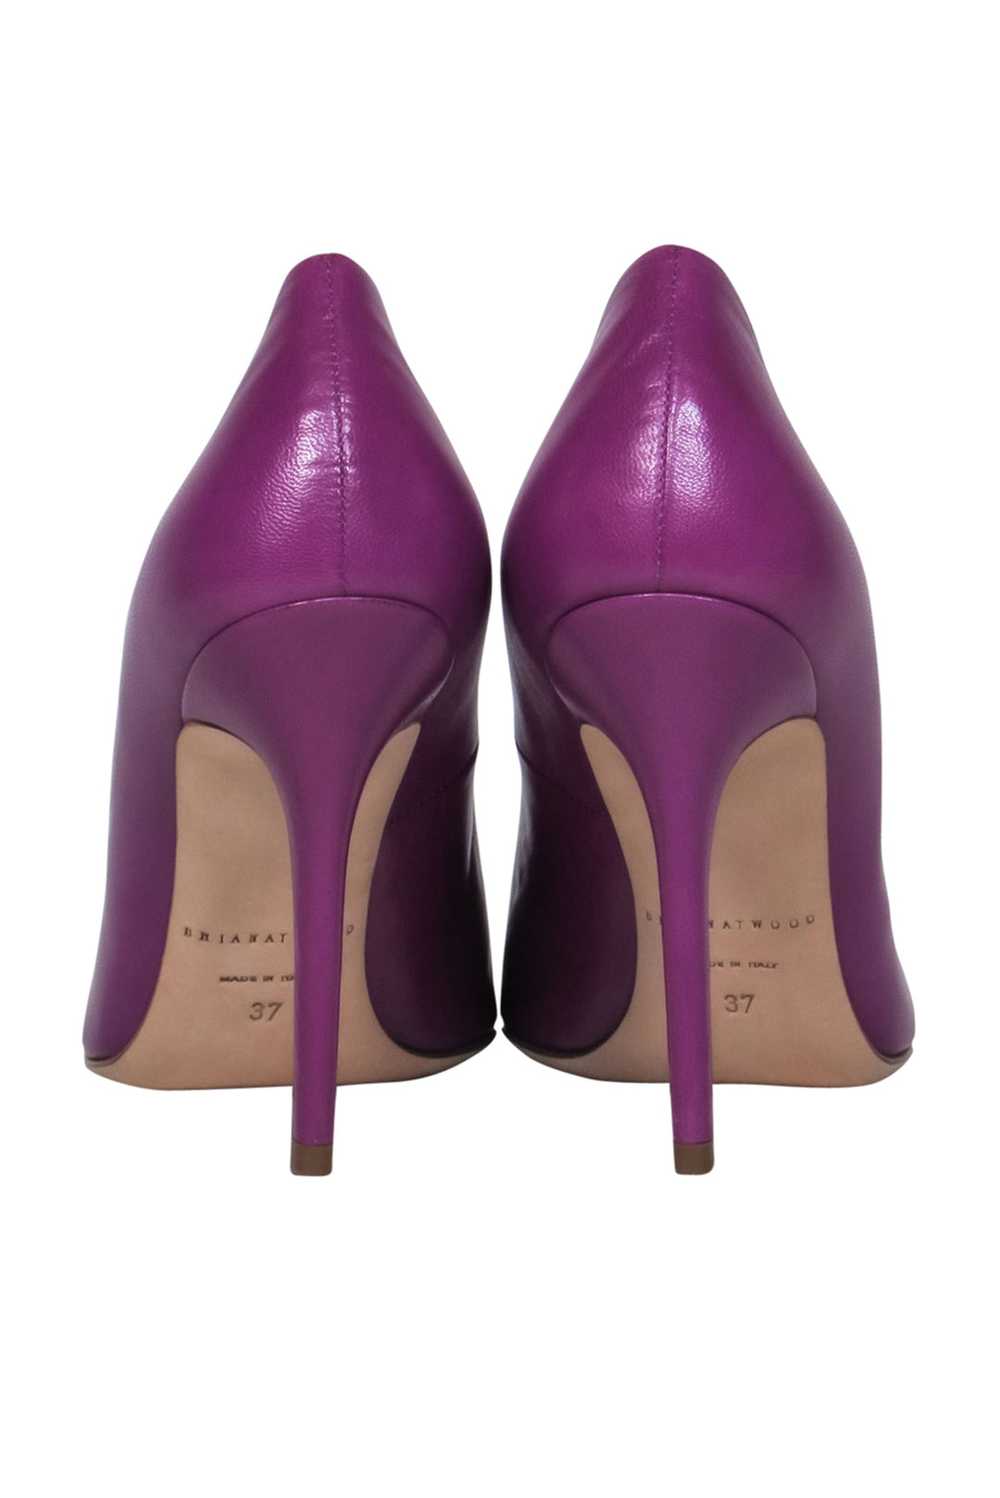 Brian Atwood - Purple Leather Pointed Toe Pumps S… - image 4